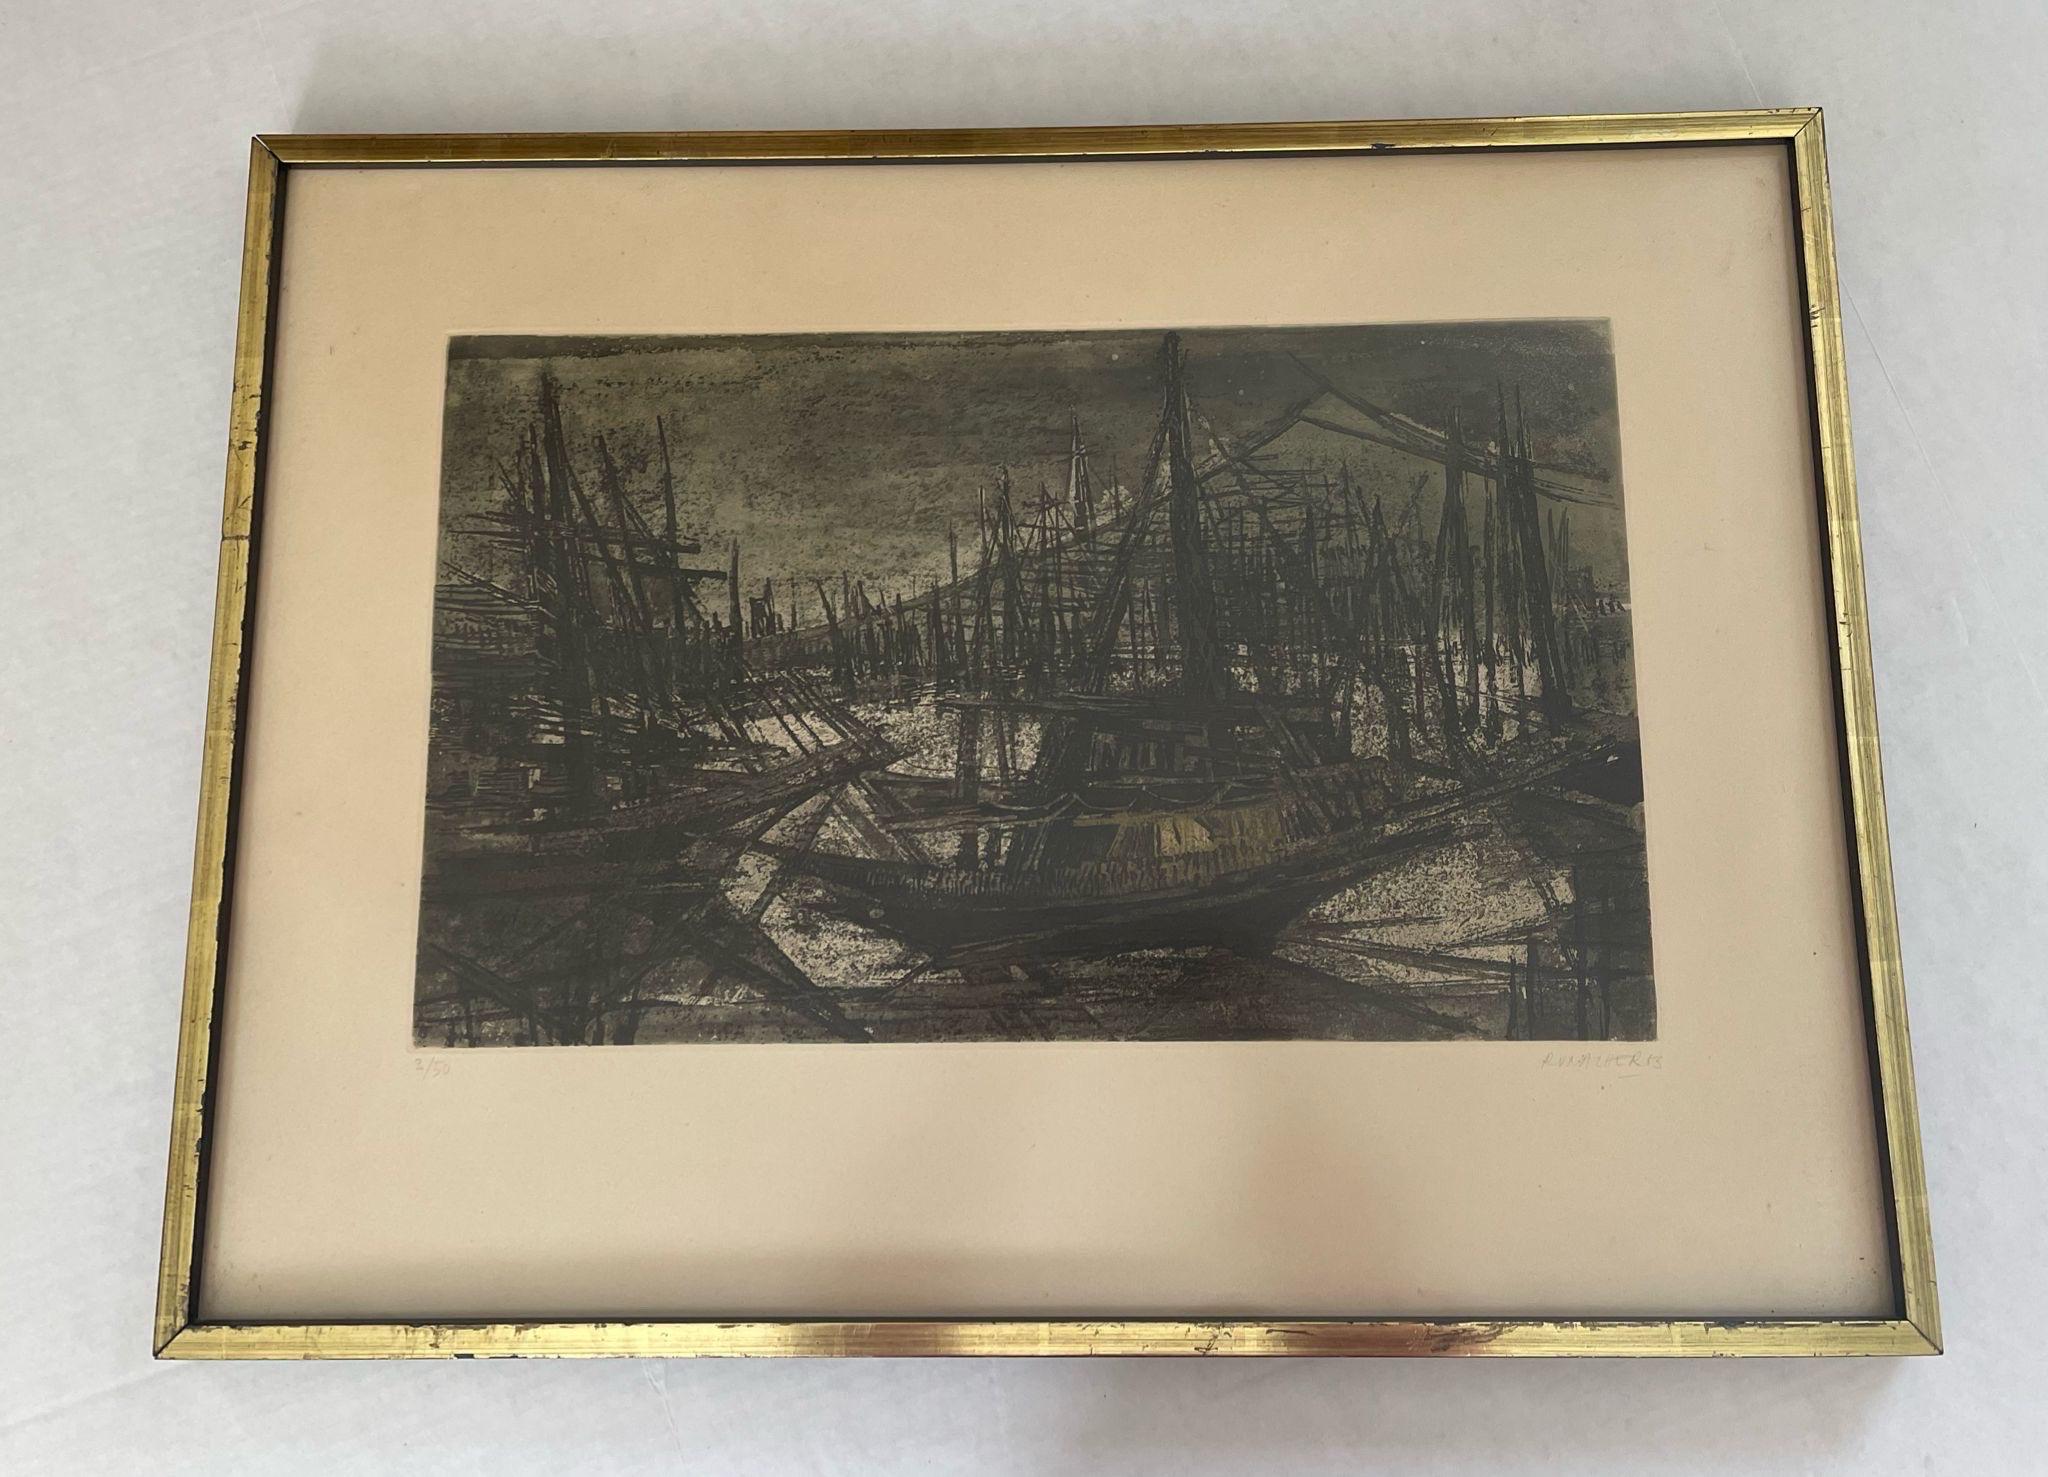 Professionally framed and matted within gold toned frame. The outer side of the frame black toned as Pictured. Signed in the Lower Corner. Suzanne was a French Artist born in 1912. All of her Etchings were signed with an ending “ B “ , the first